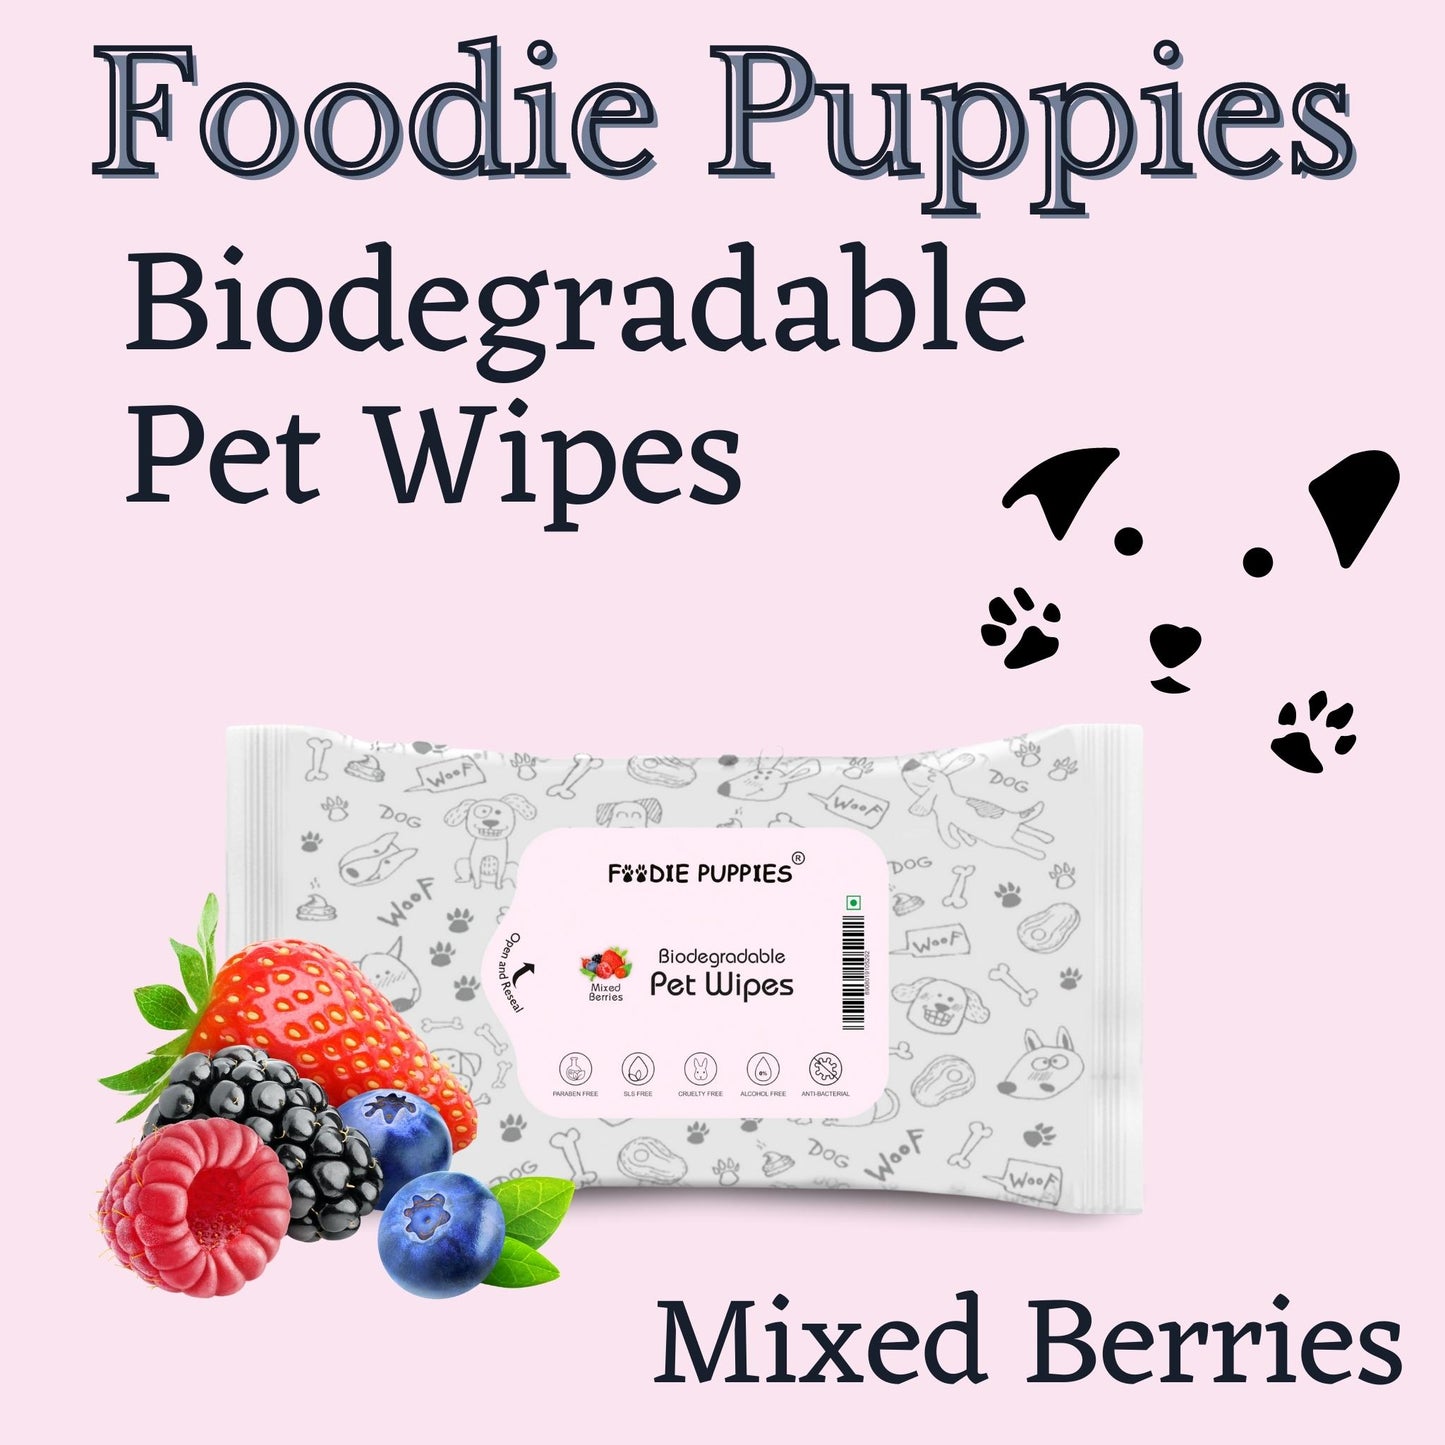 Foodie Puppies Biodegradable Mixed Berries Pet Wipes 10 Pulls, Pack of 3